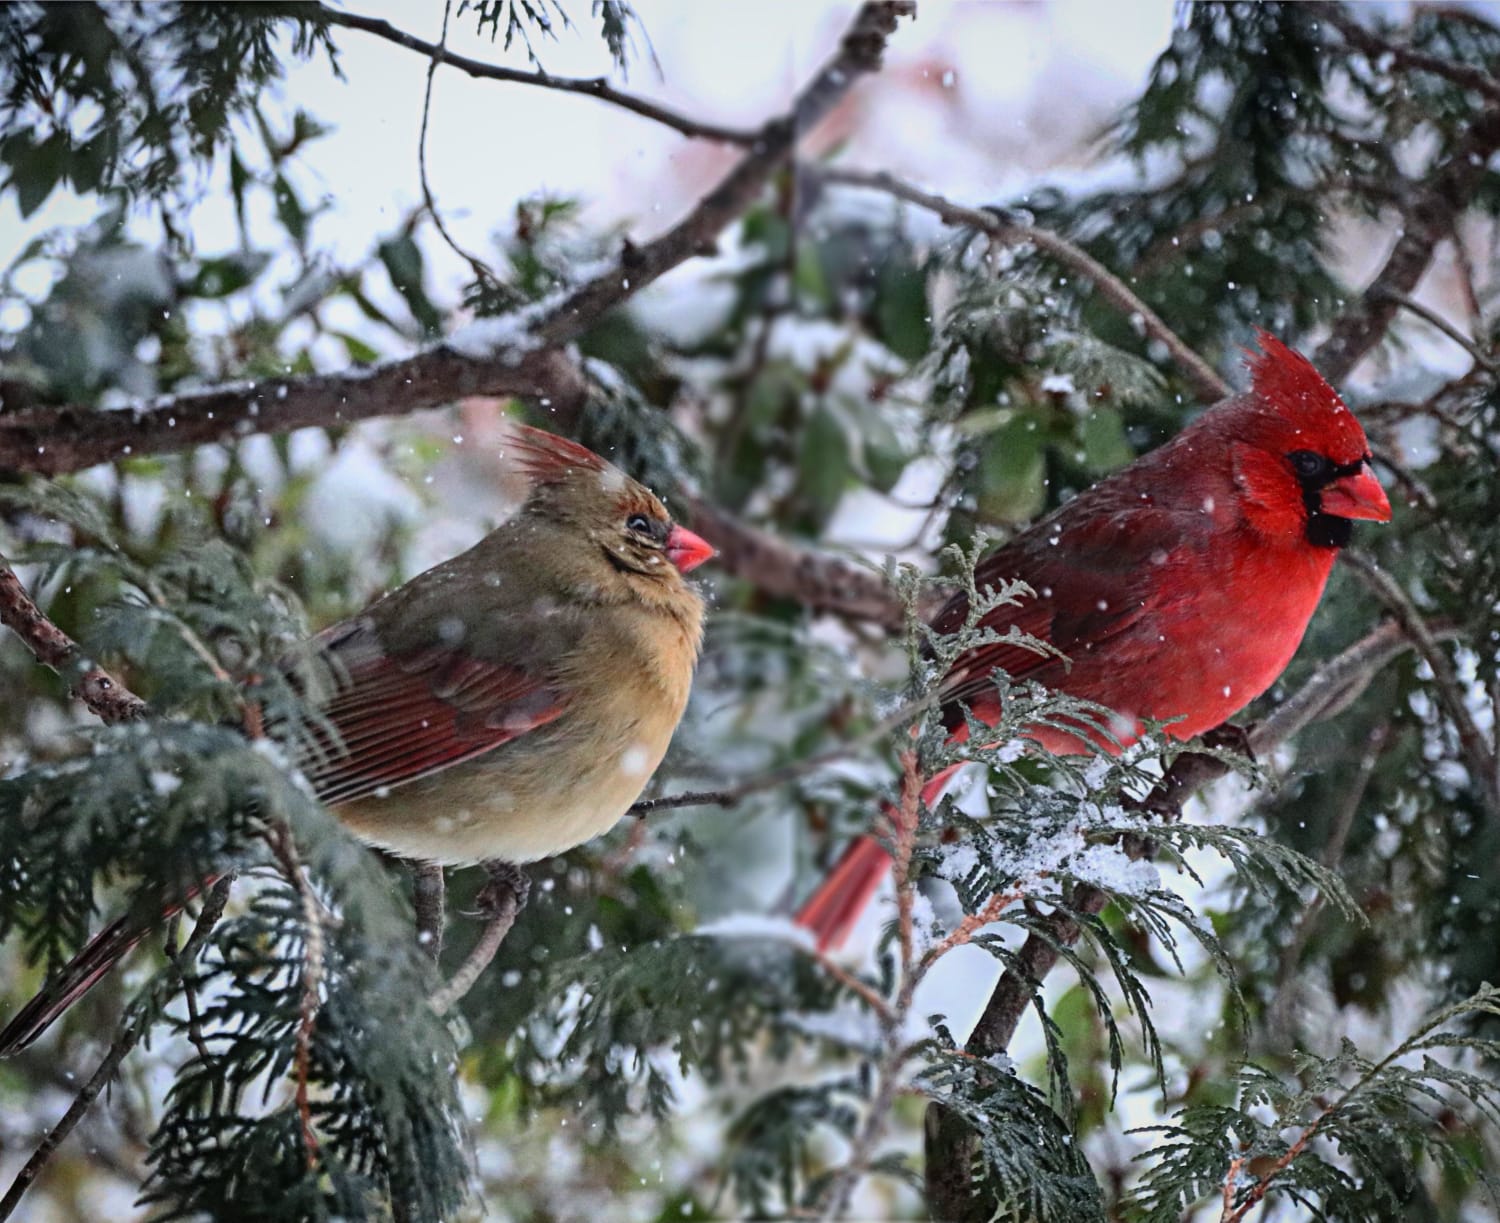 Male and Female Cardinals perched next to each other